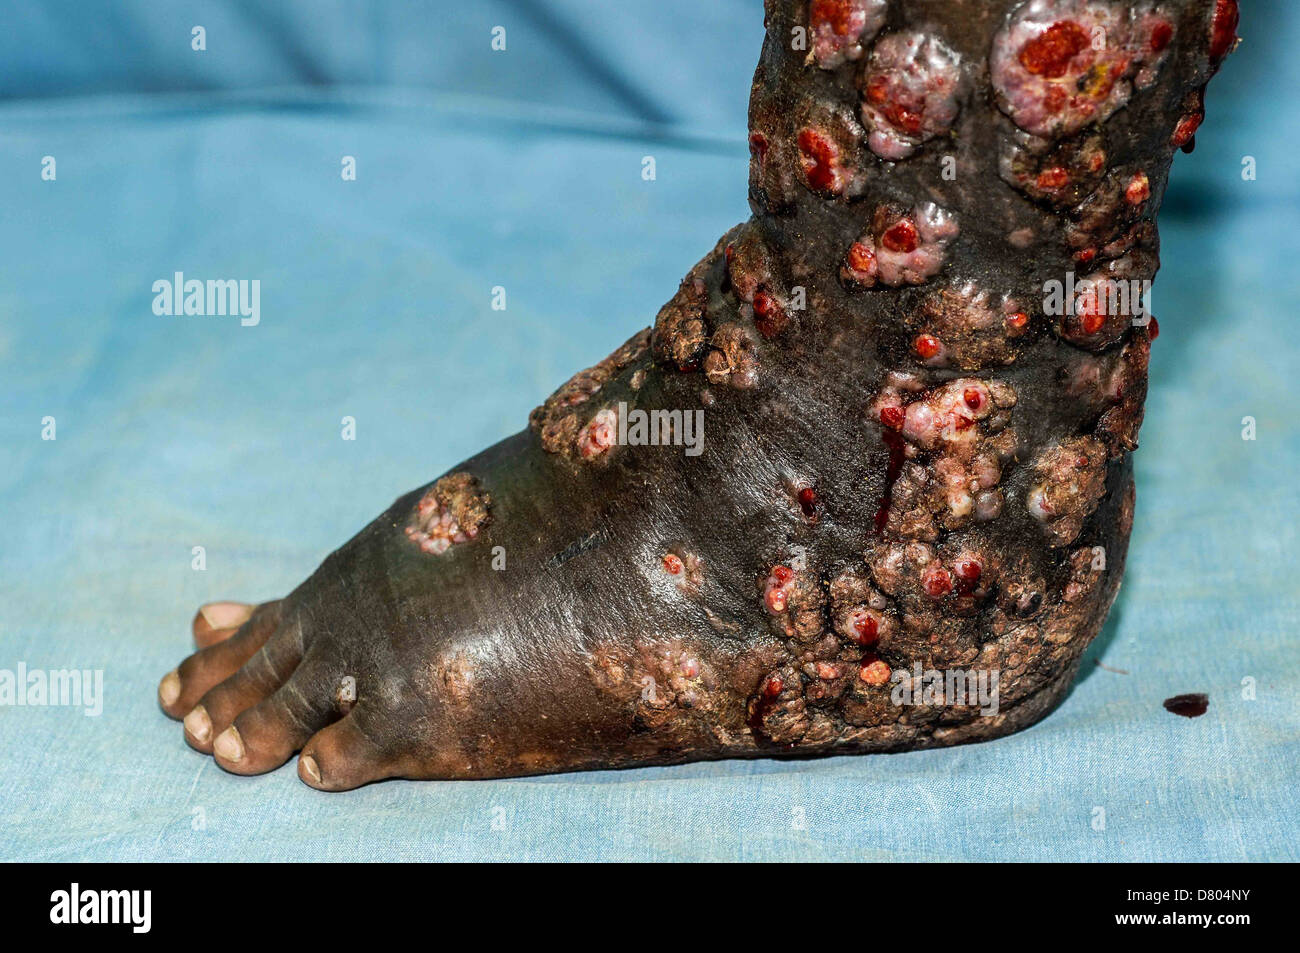 Leg of a 37 year old male suffering from severe mycetoma in his left foot and lower leg. Stock Photo